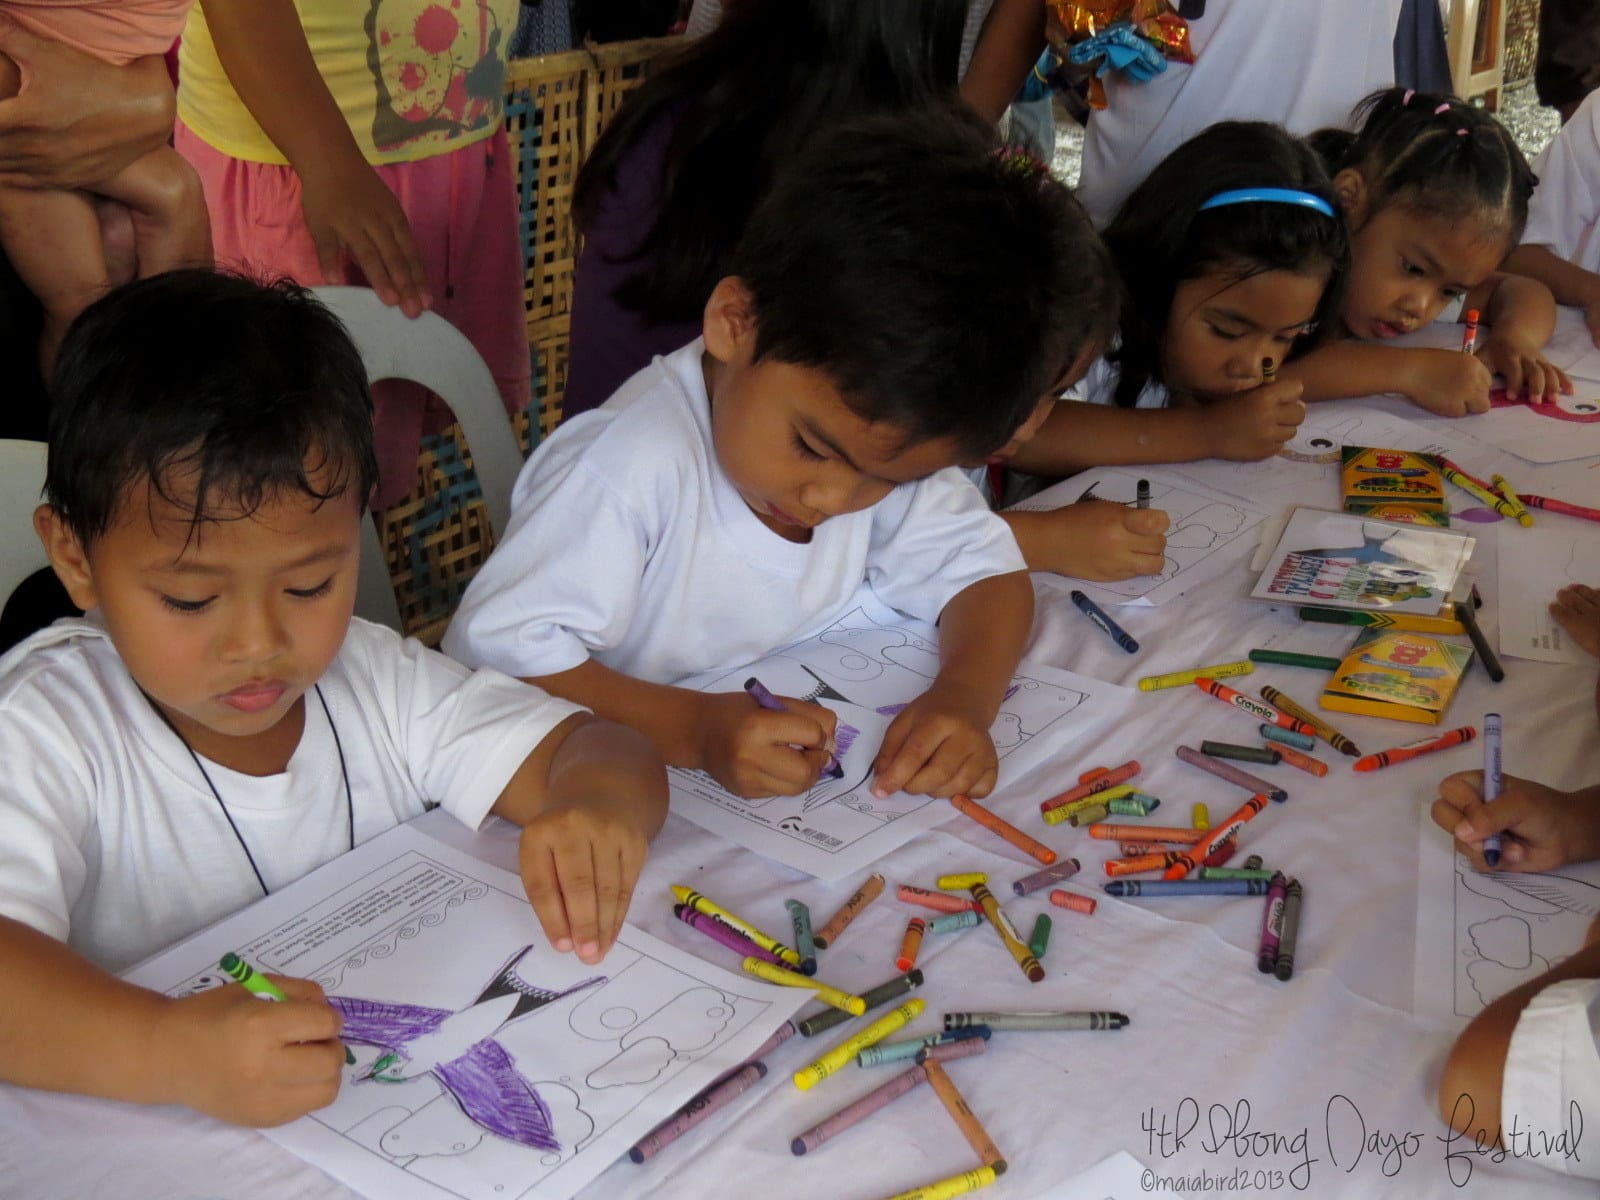 Lots of young artists flocked to the coloring booth. Photo by Maia Tanedo